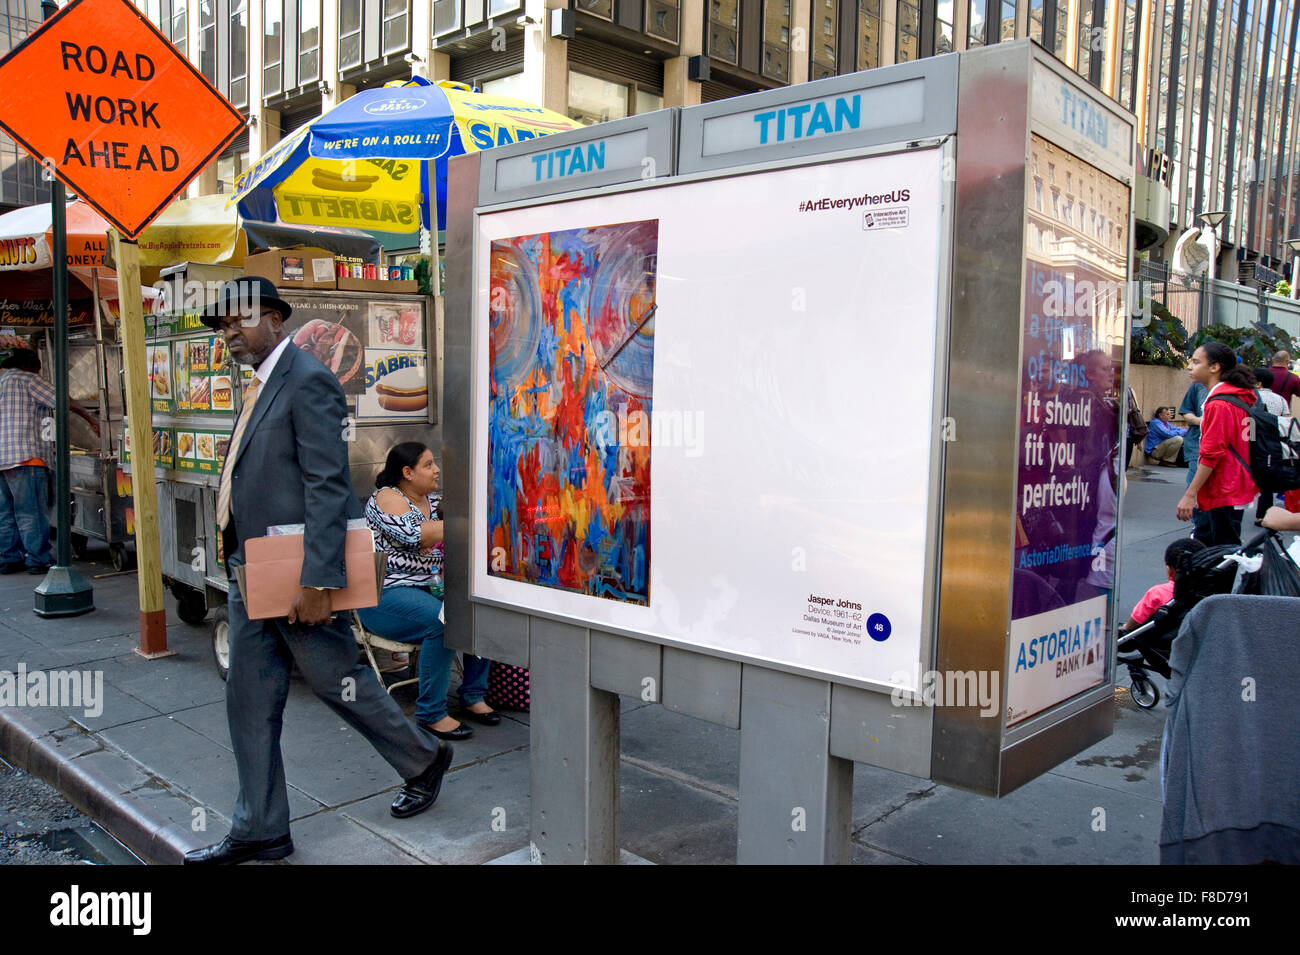 Jasper Johns painting is reproduced on outdoor advertising panel in New York City during the Art Everywhere event. Stock Photo